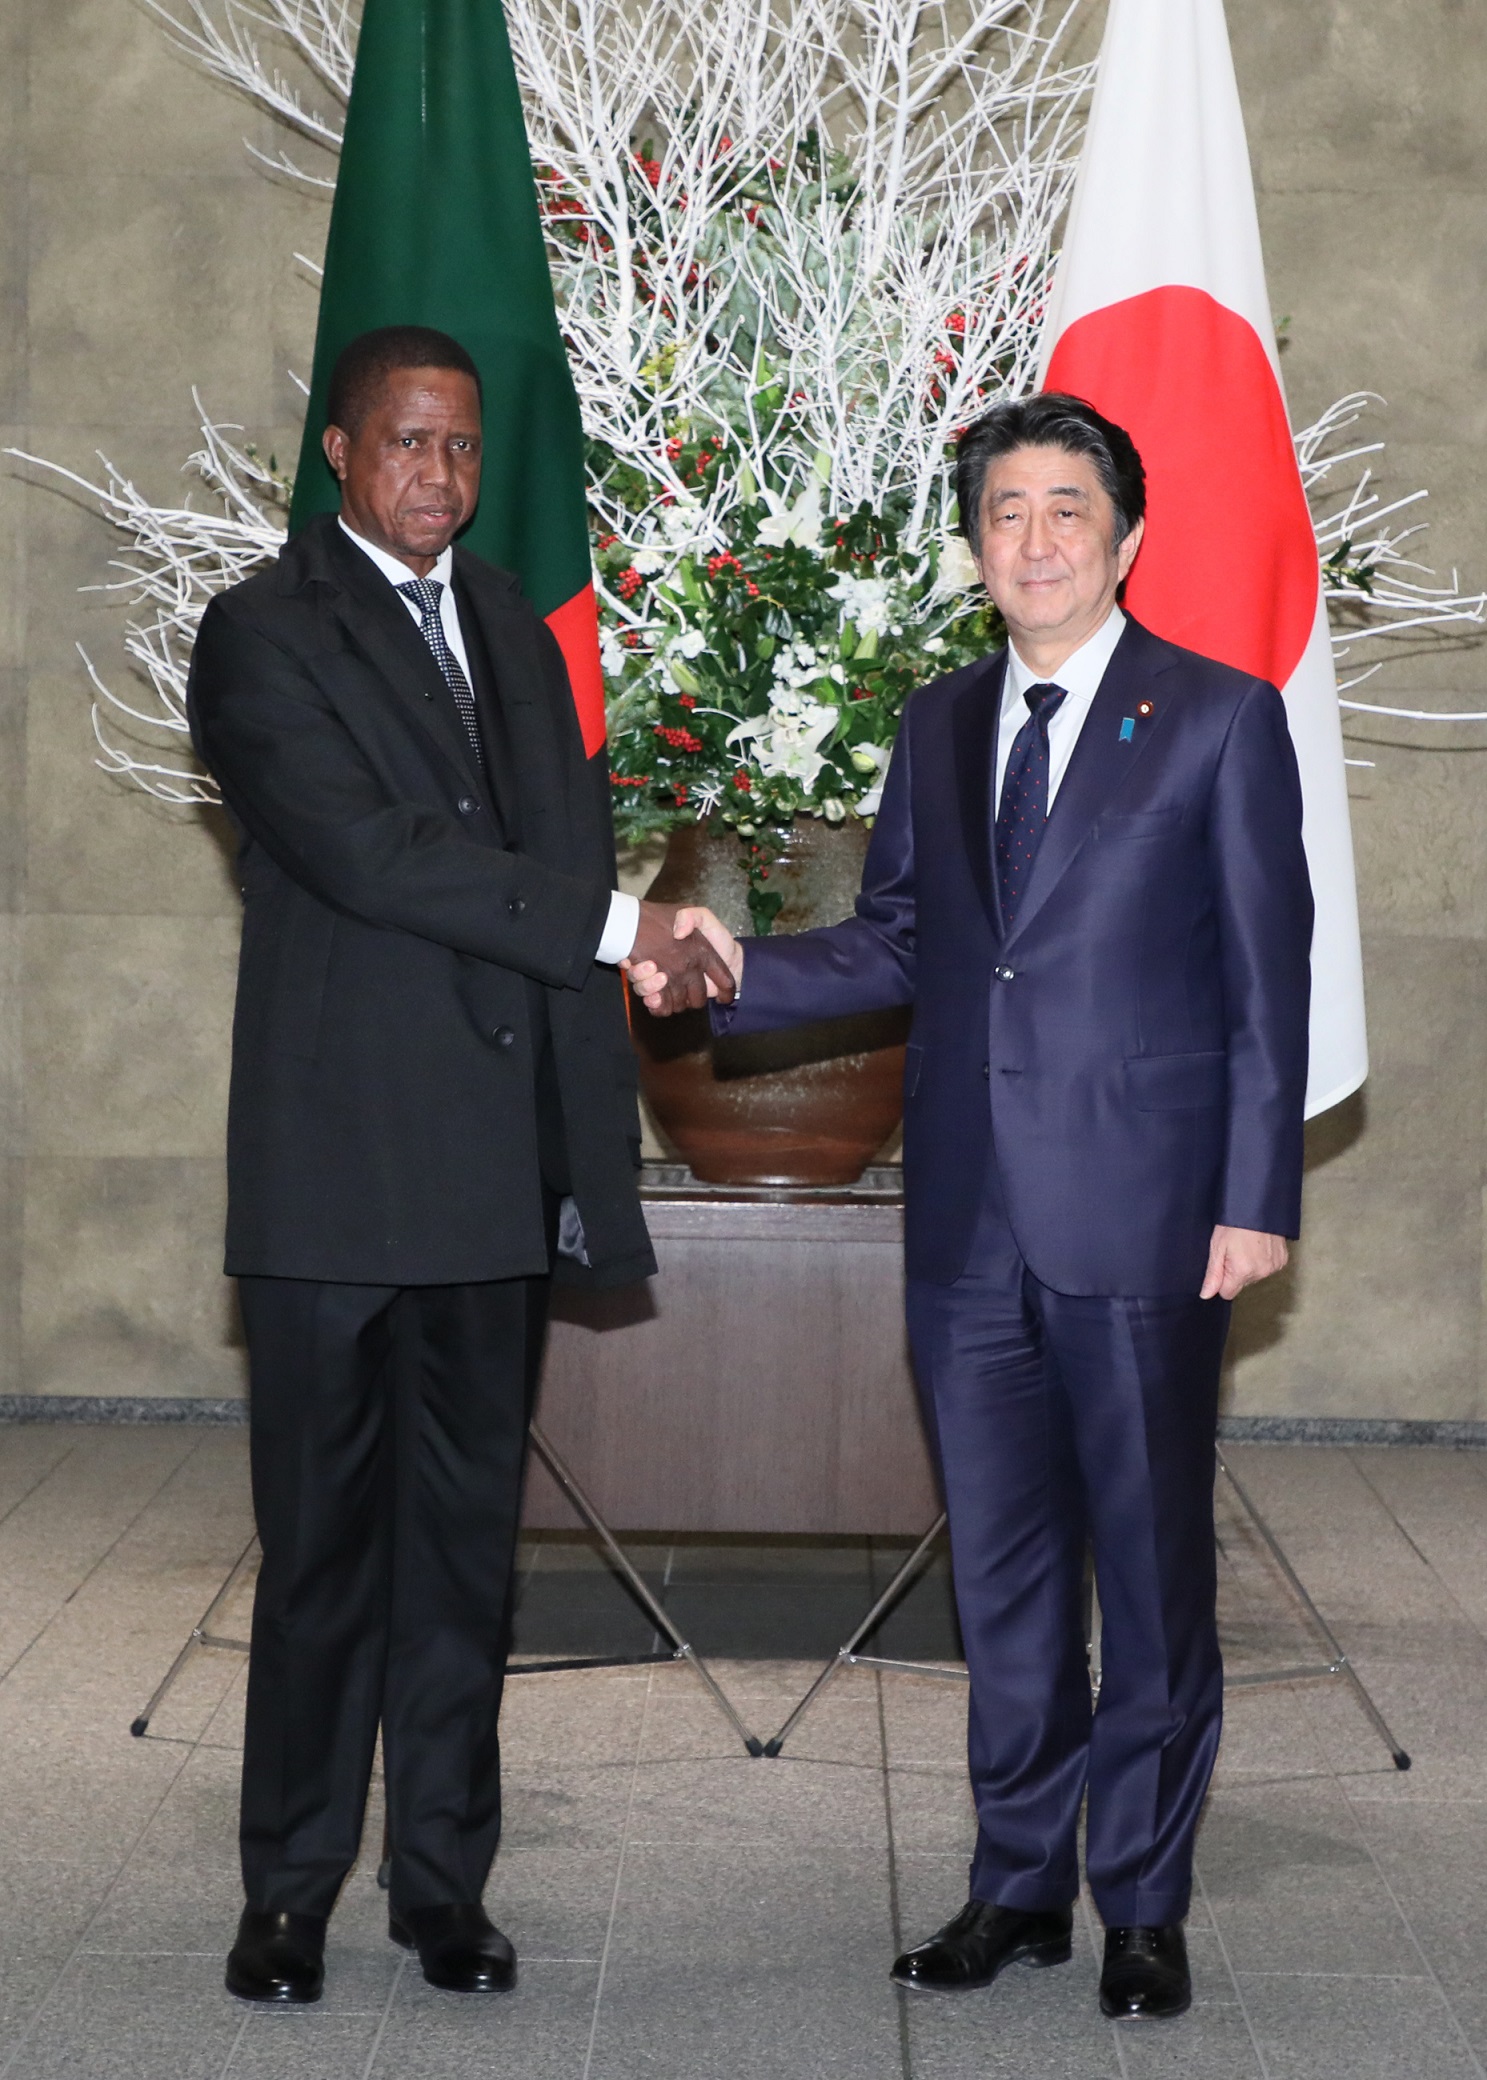 Photograph of the Prime Minister welcoming the President of Zambia